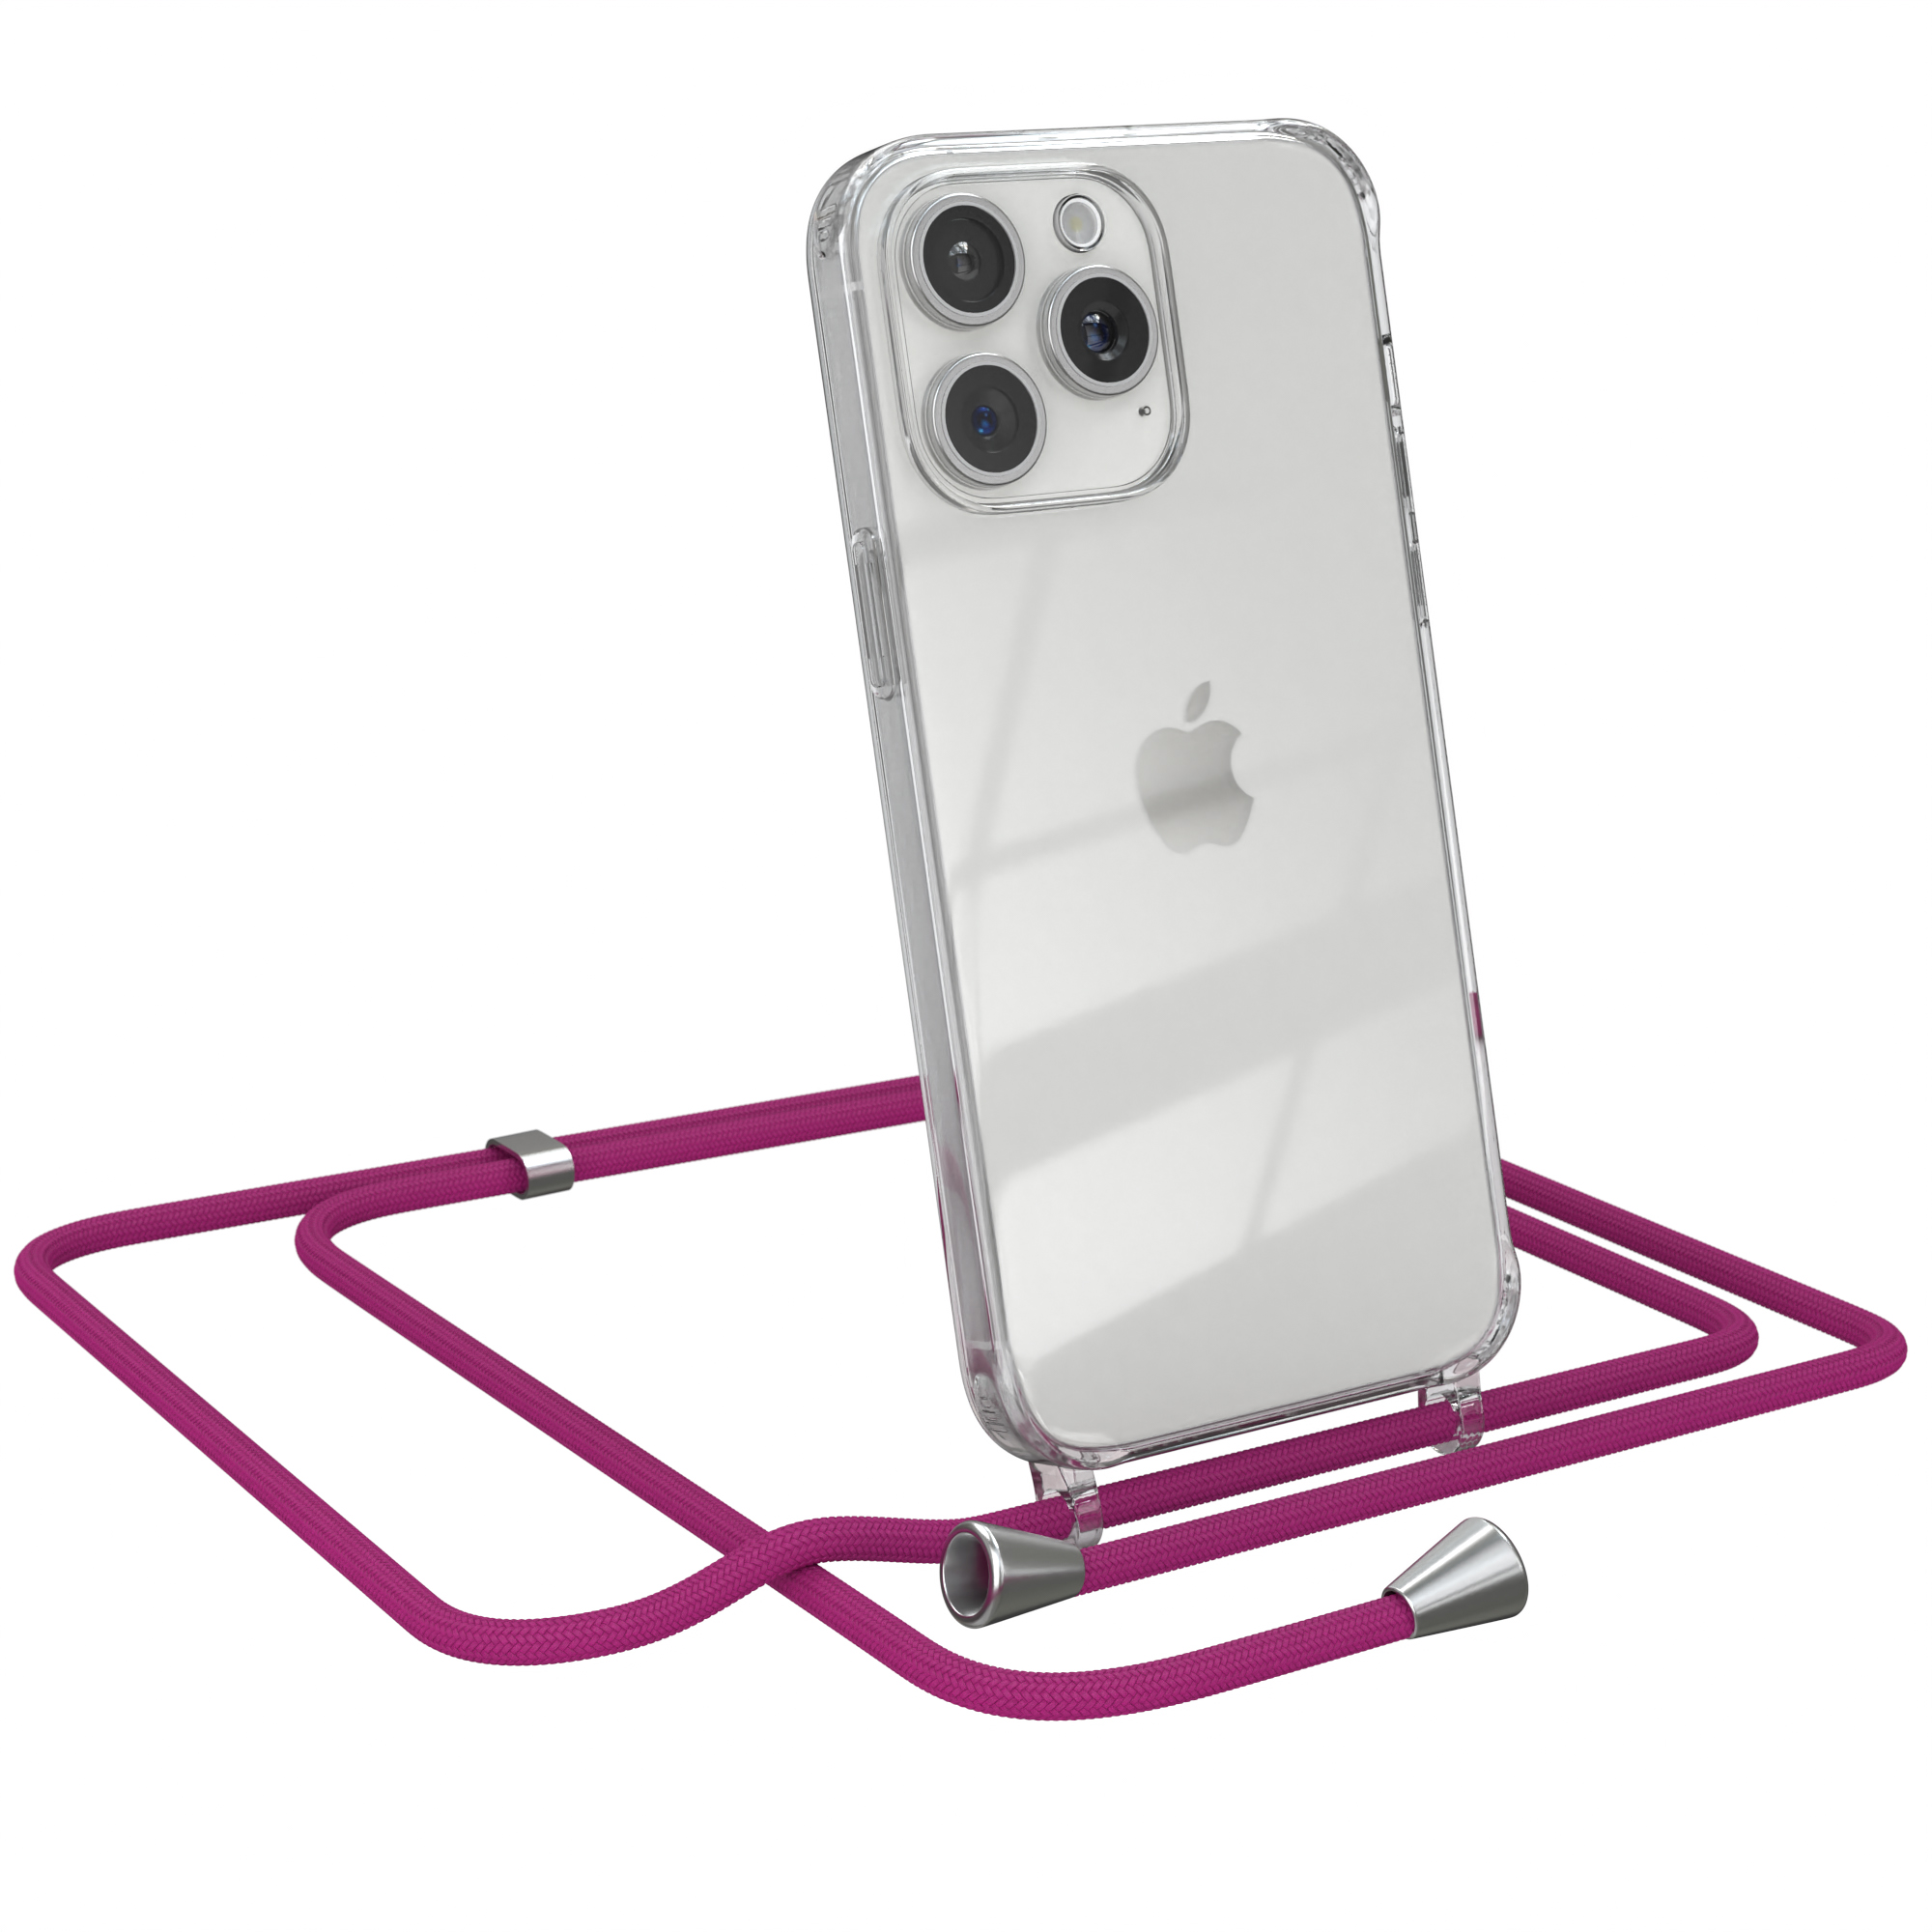 15 / Silber Pink Cover Clear Clips Apple, Pro Umhängeband, iPhone Max, Umhängetasche, EAZY mit CASE